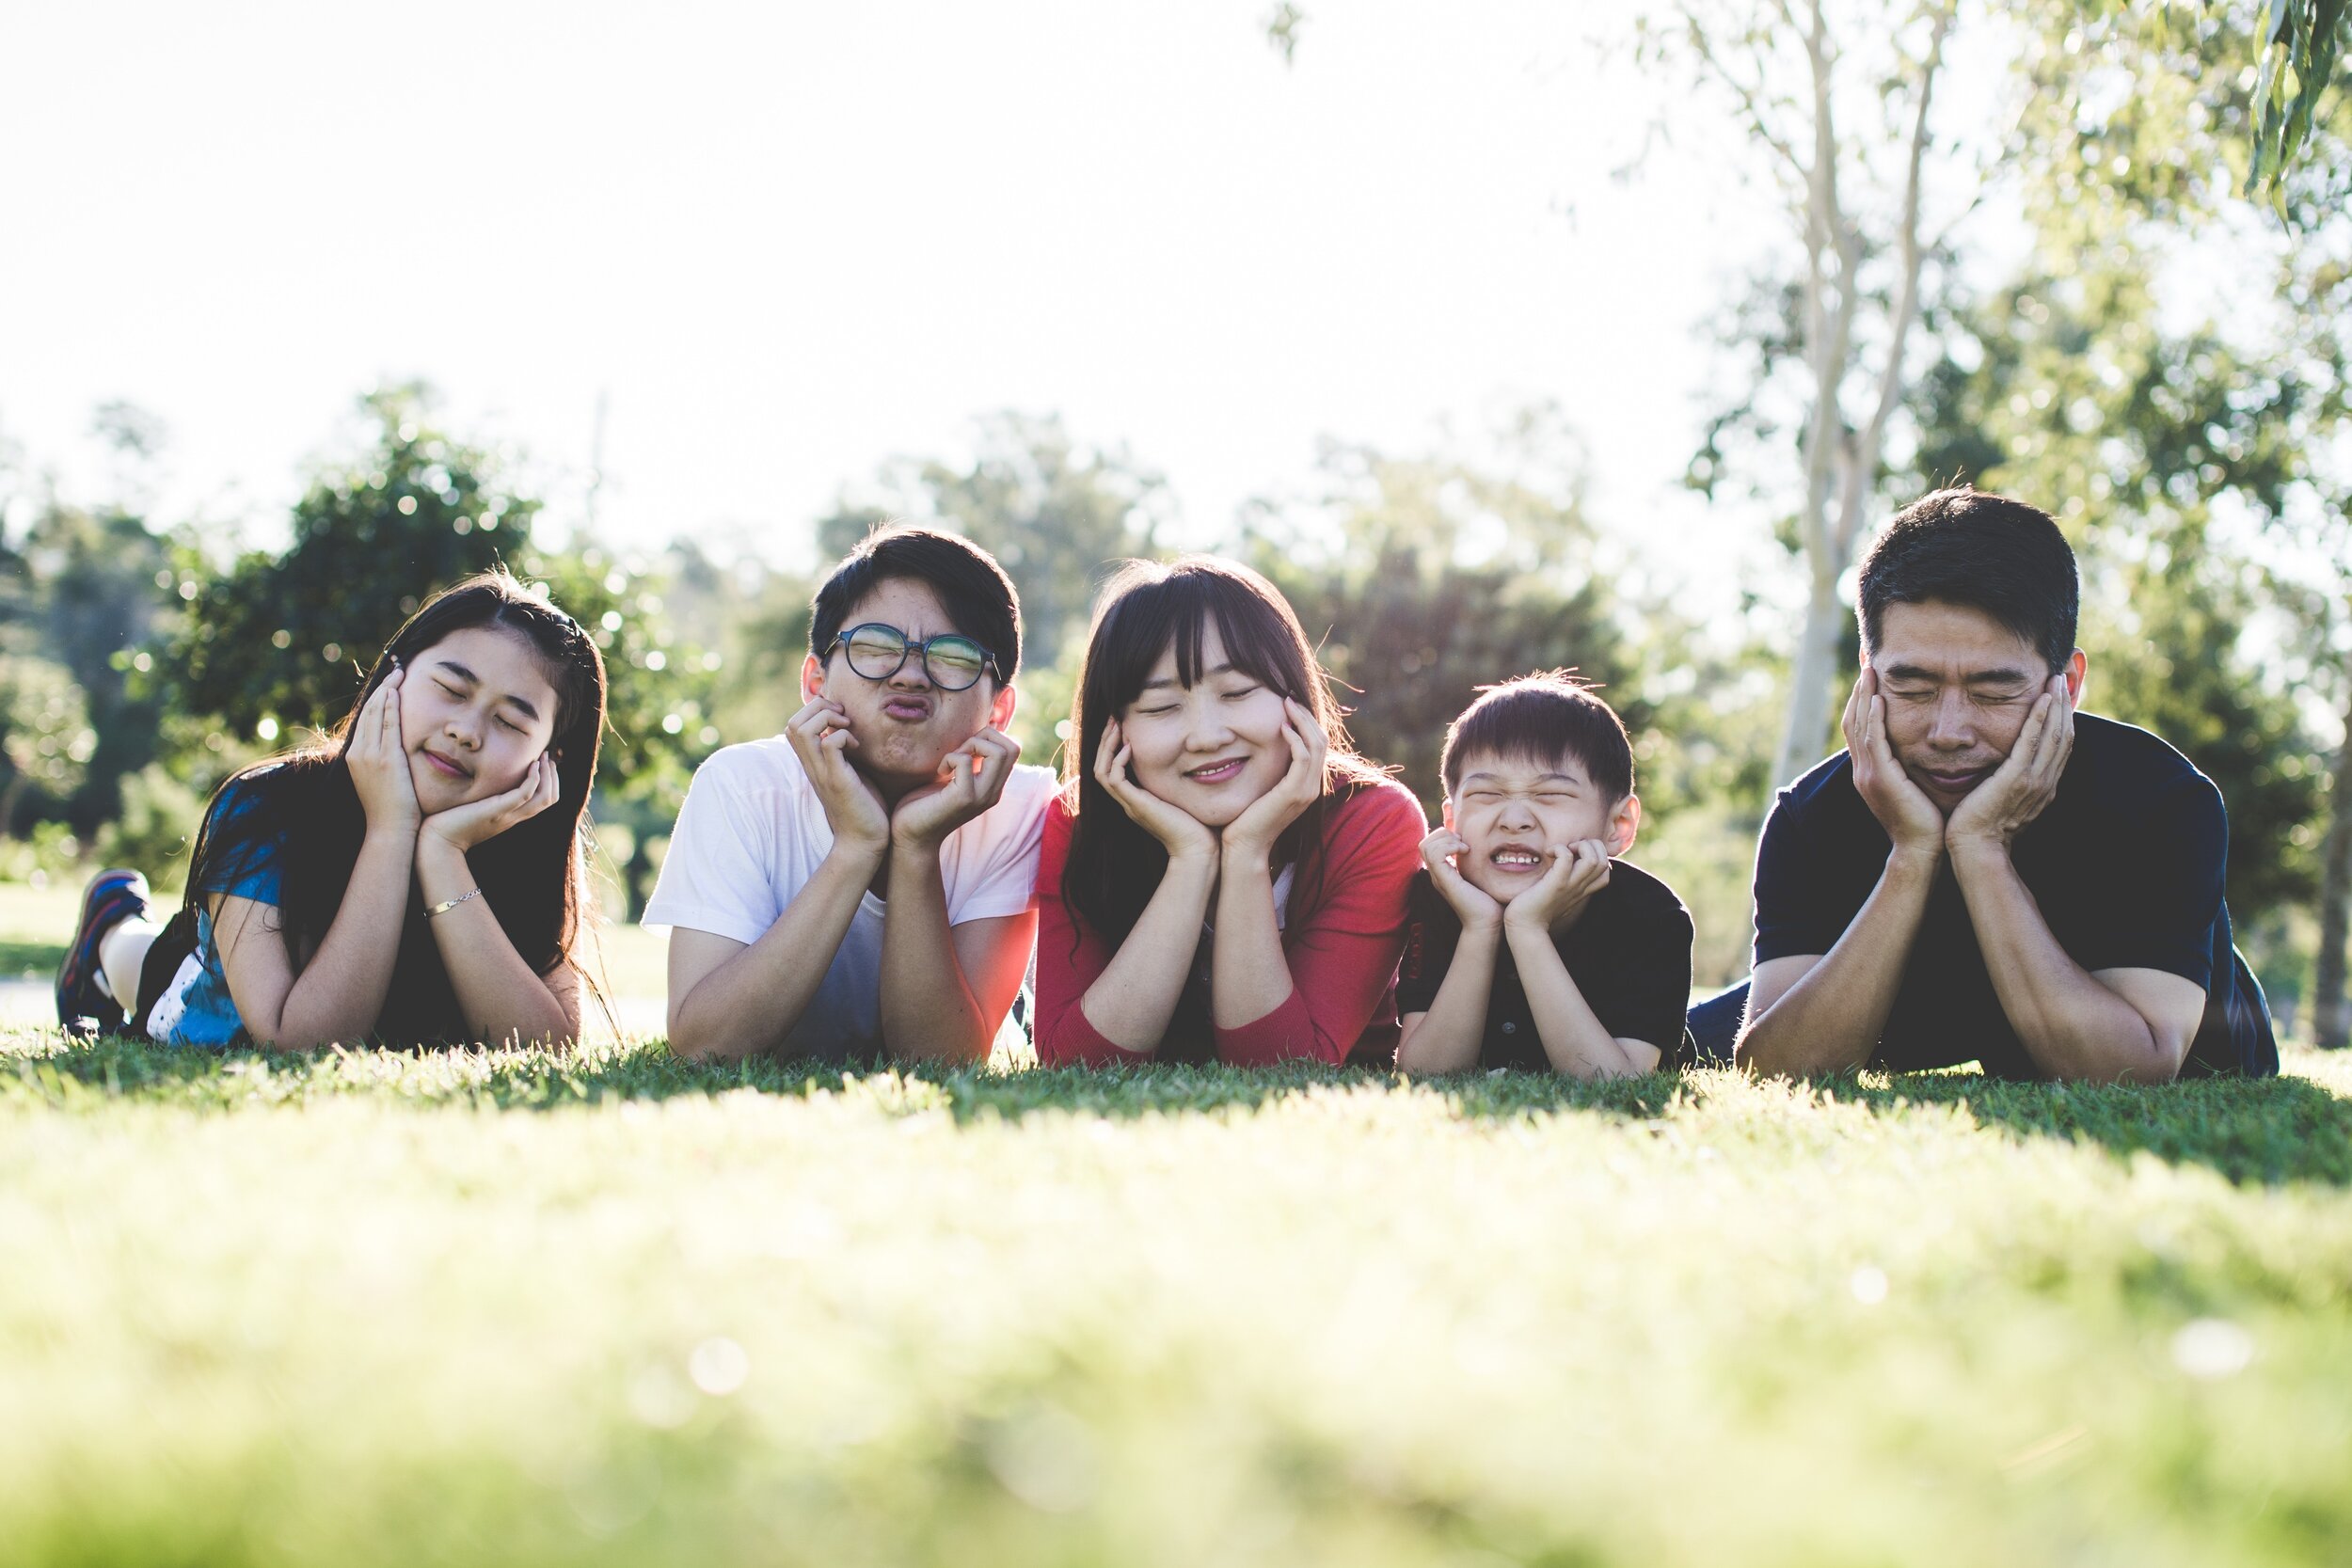 cute-family-picture-160994.jpg